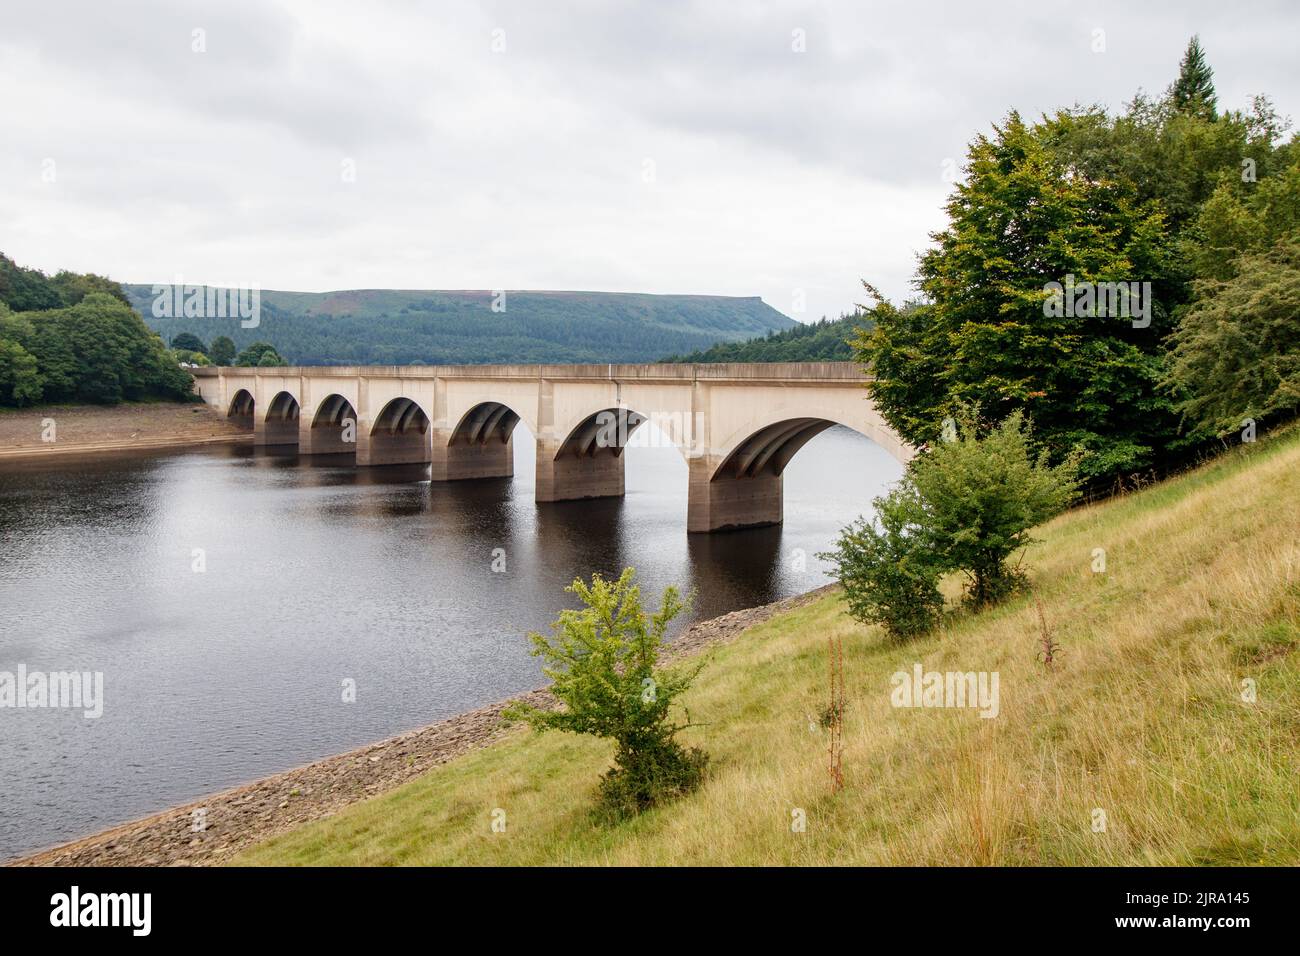 The Ashopton Bridge on the A57 that crosses over the ladybower dam in the peak district.The Ladybower reservoir during the dry and drought weather in the summer of 2022. Ladybower Reservoir is a large Y-shaped, artificial reservoir, the lowest of three in the Upper Derwent Valley in Derbyshire, England. Stock Photo